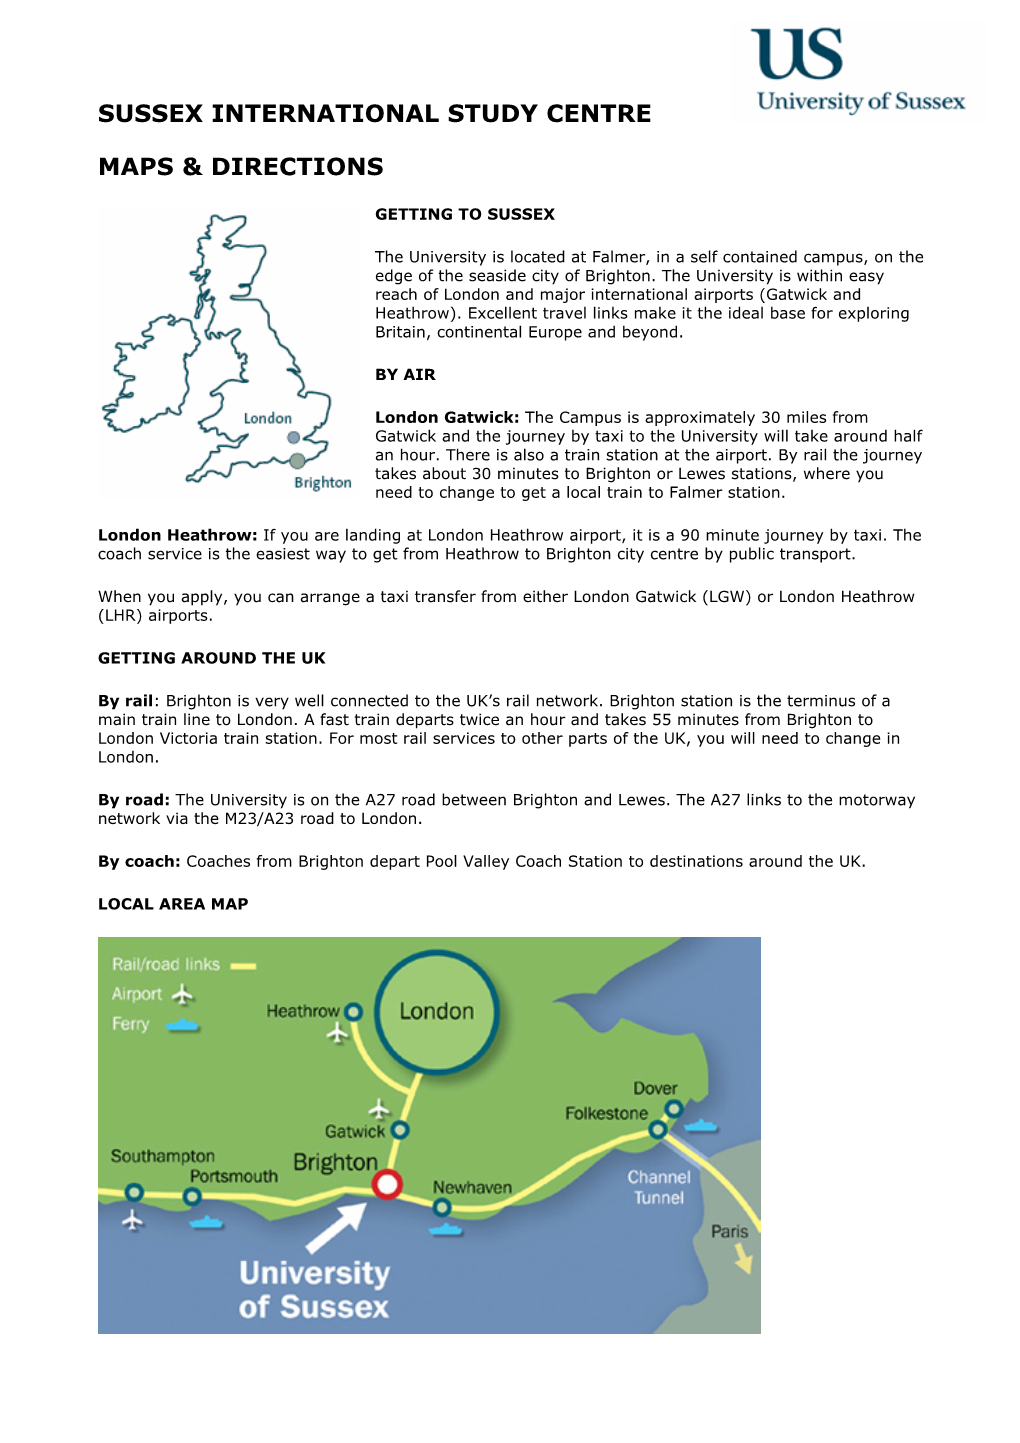 Sussex International Study Centre Maps & Directions